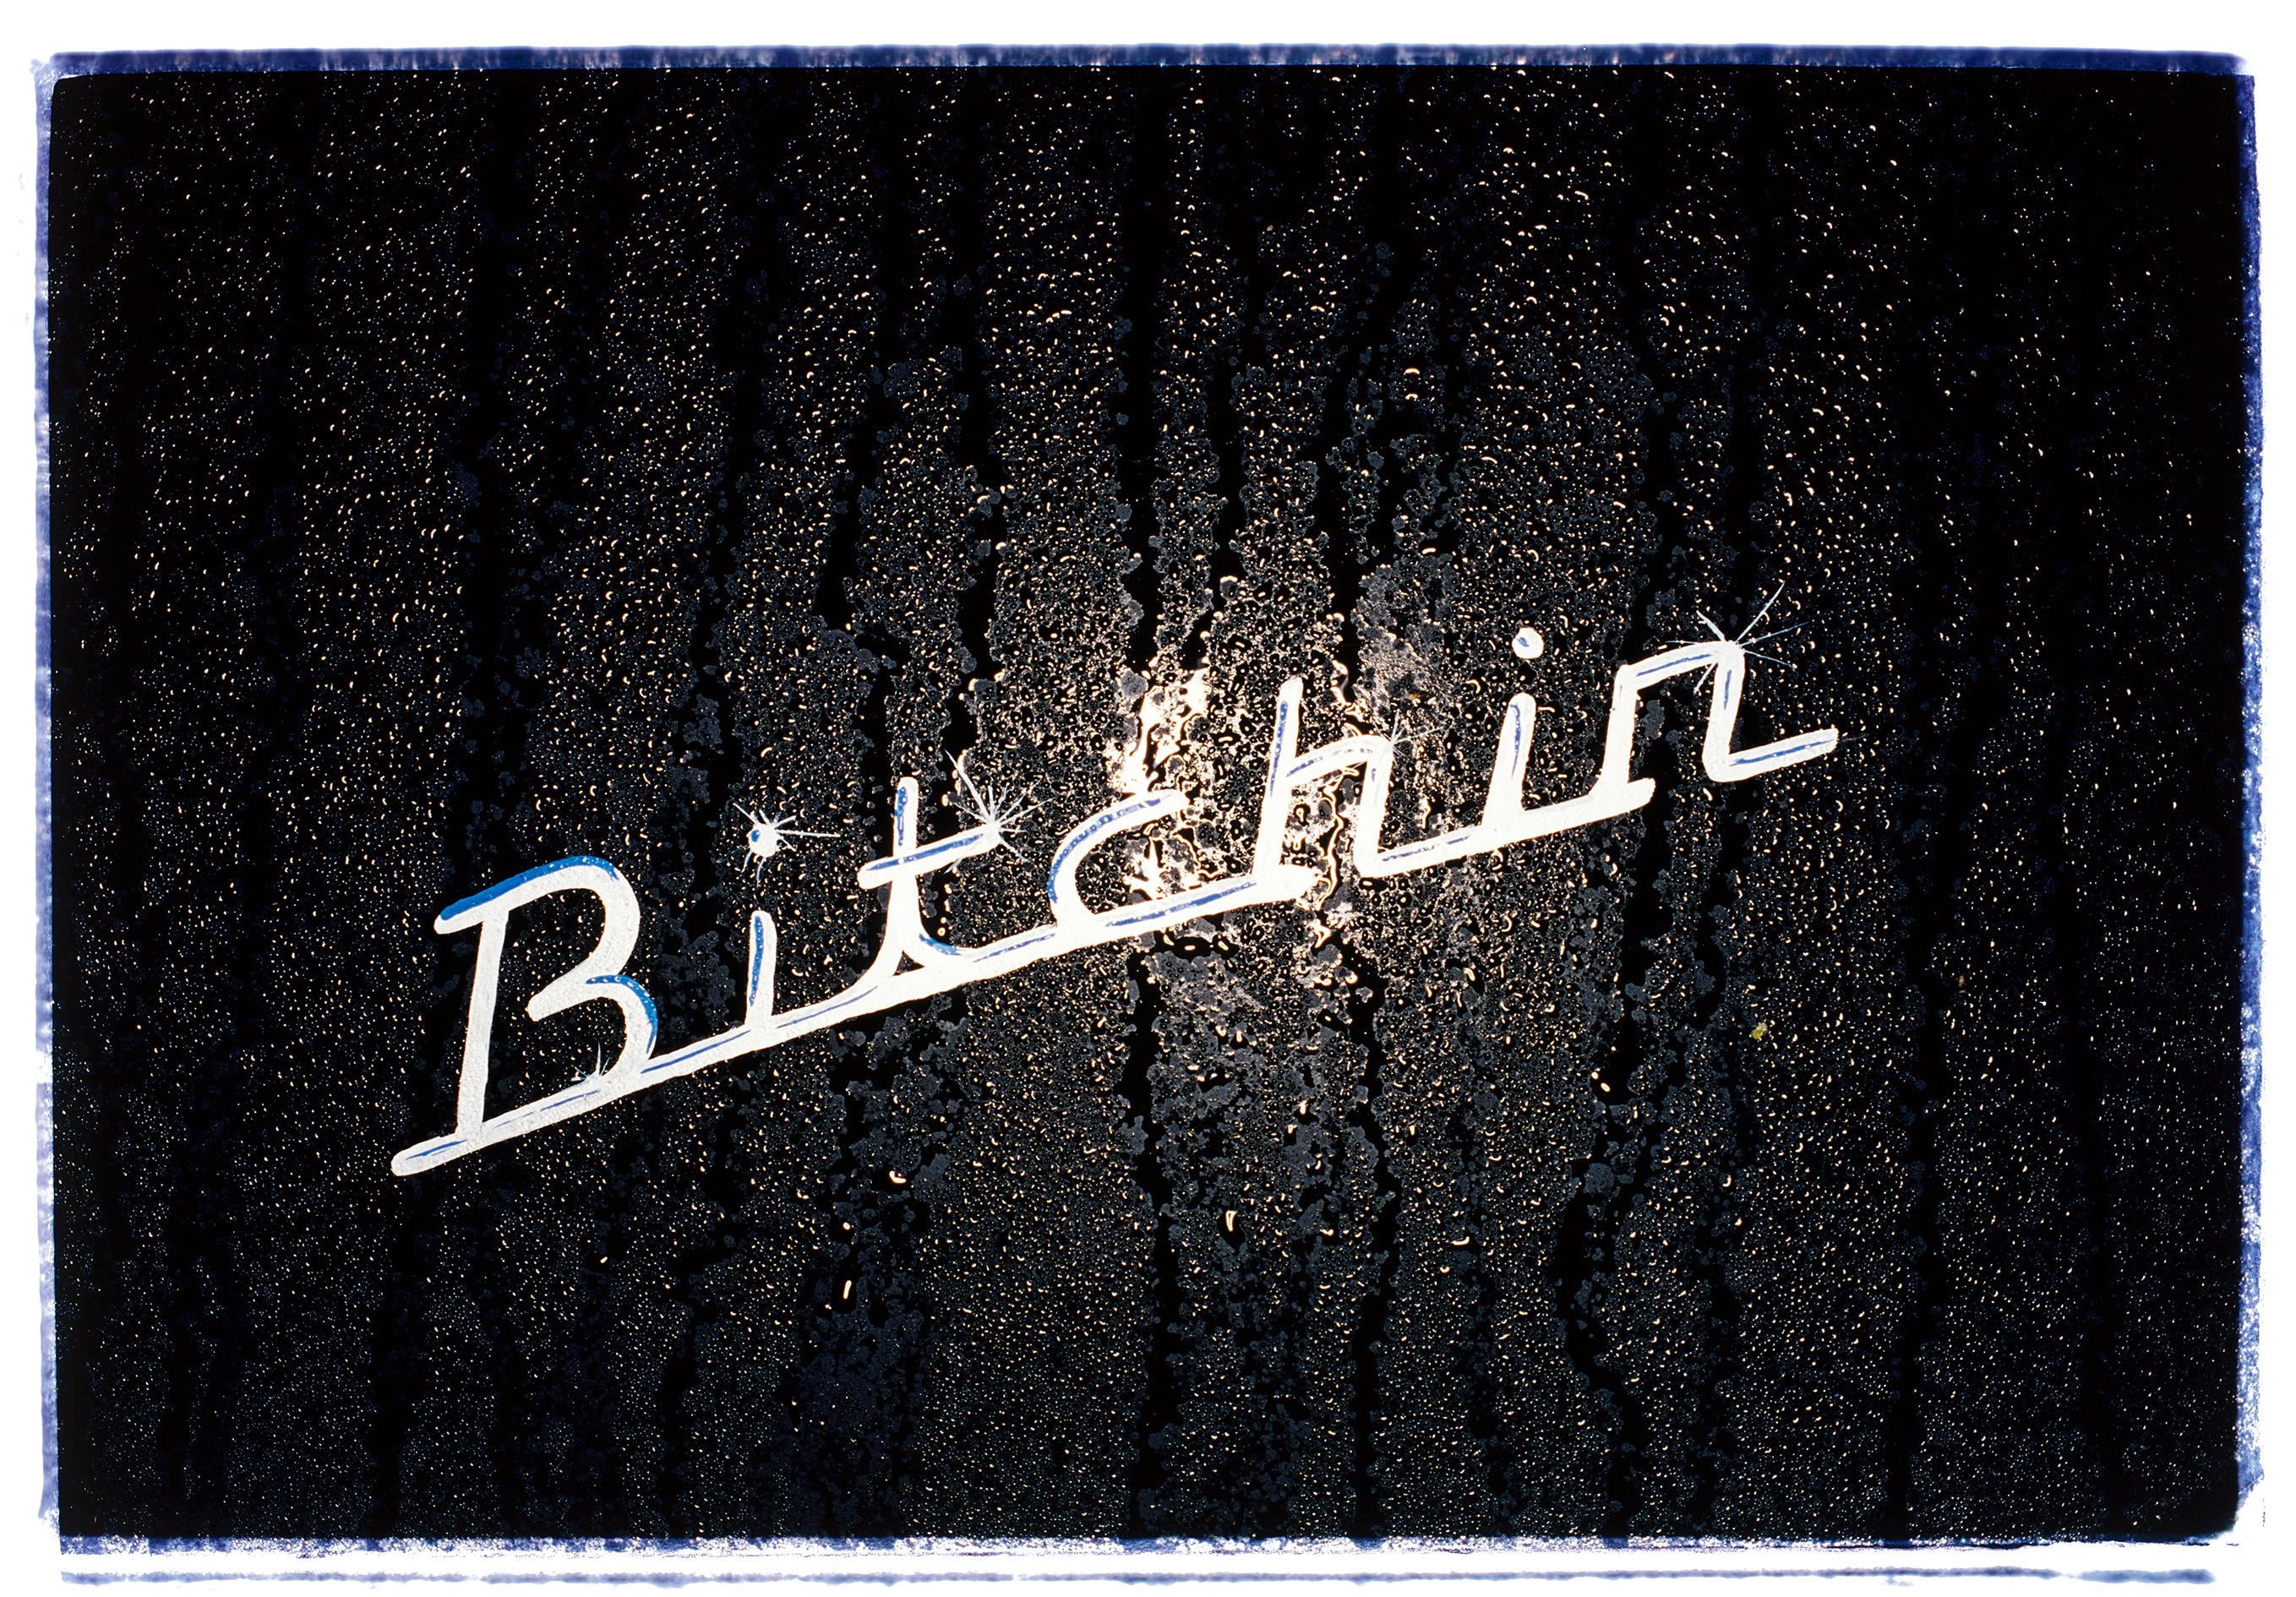 Bitchin', Hemsby, Norfolk - Graphic typography pop art color photography